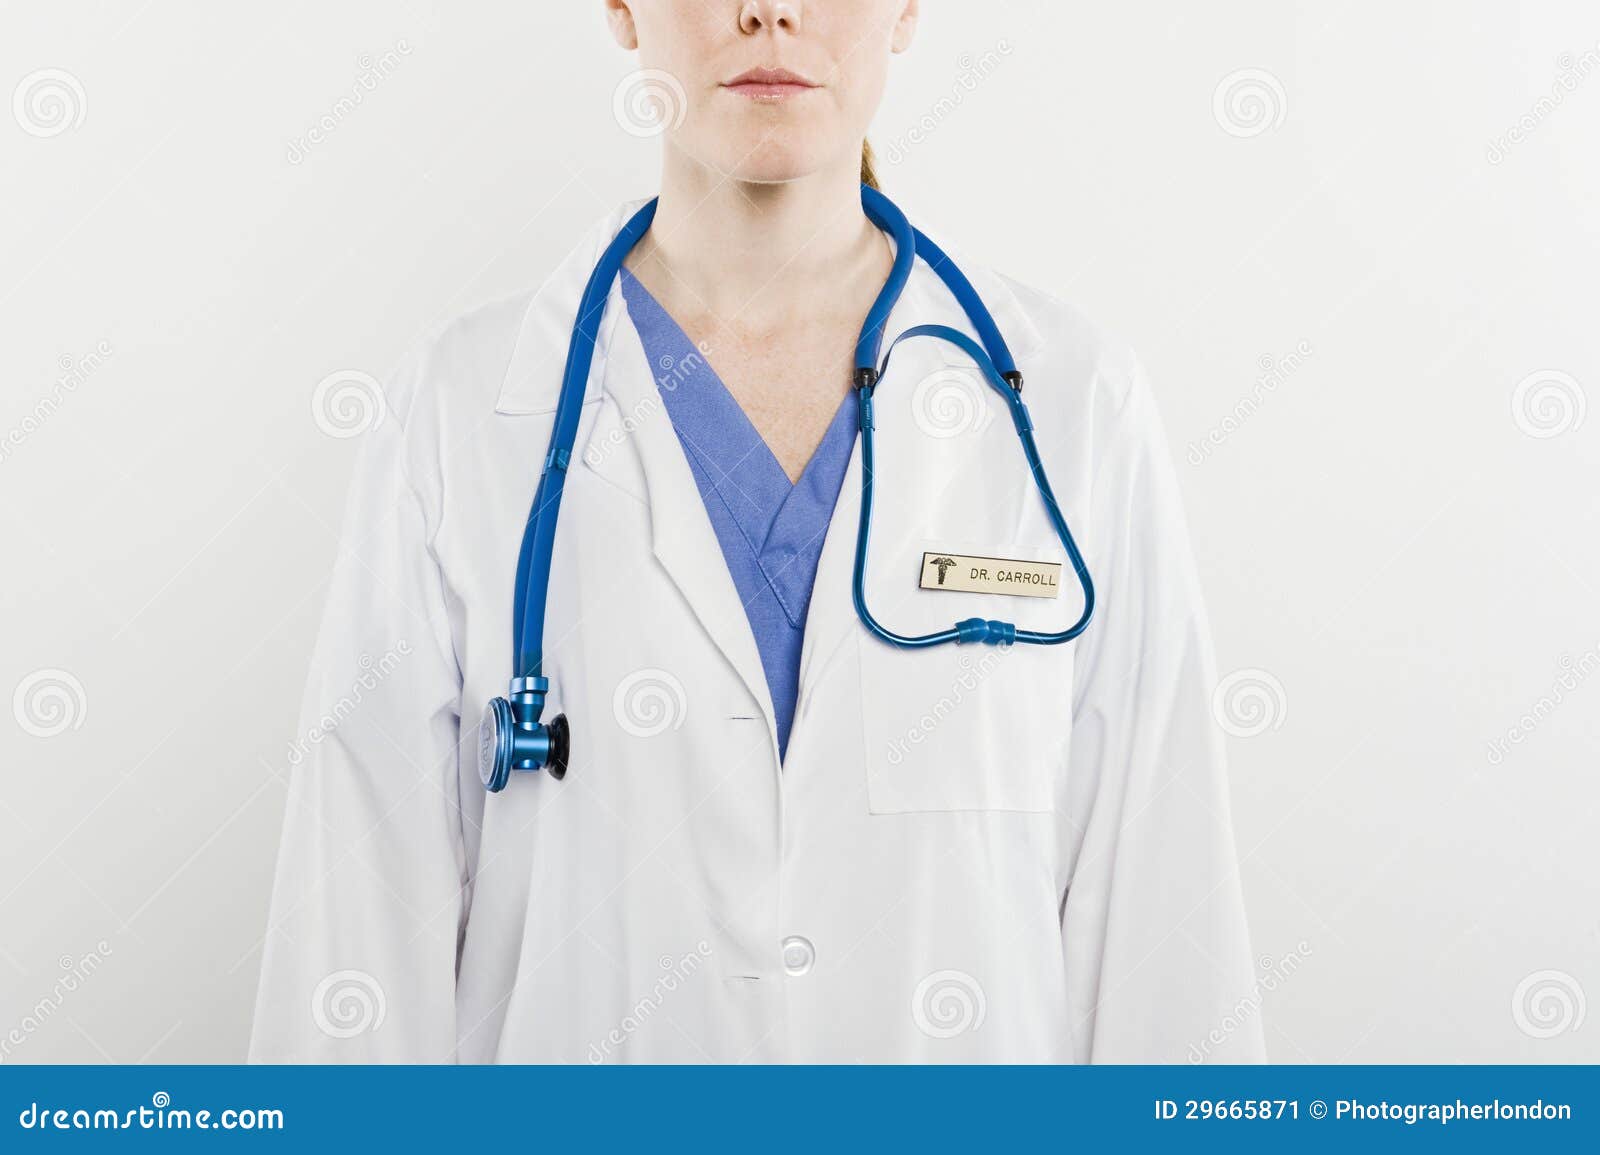 midsection of doctor with stethoscope around neck